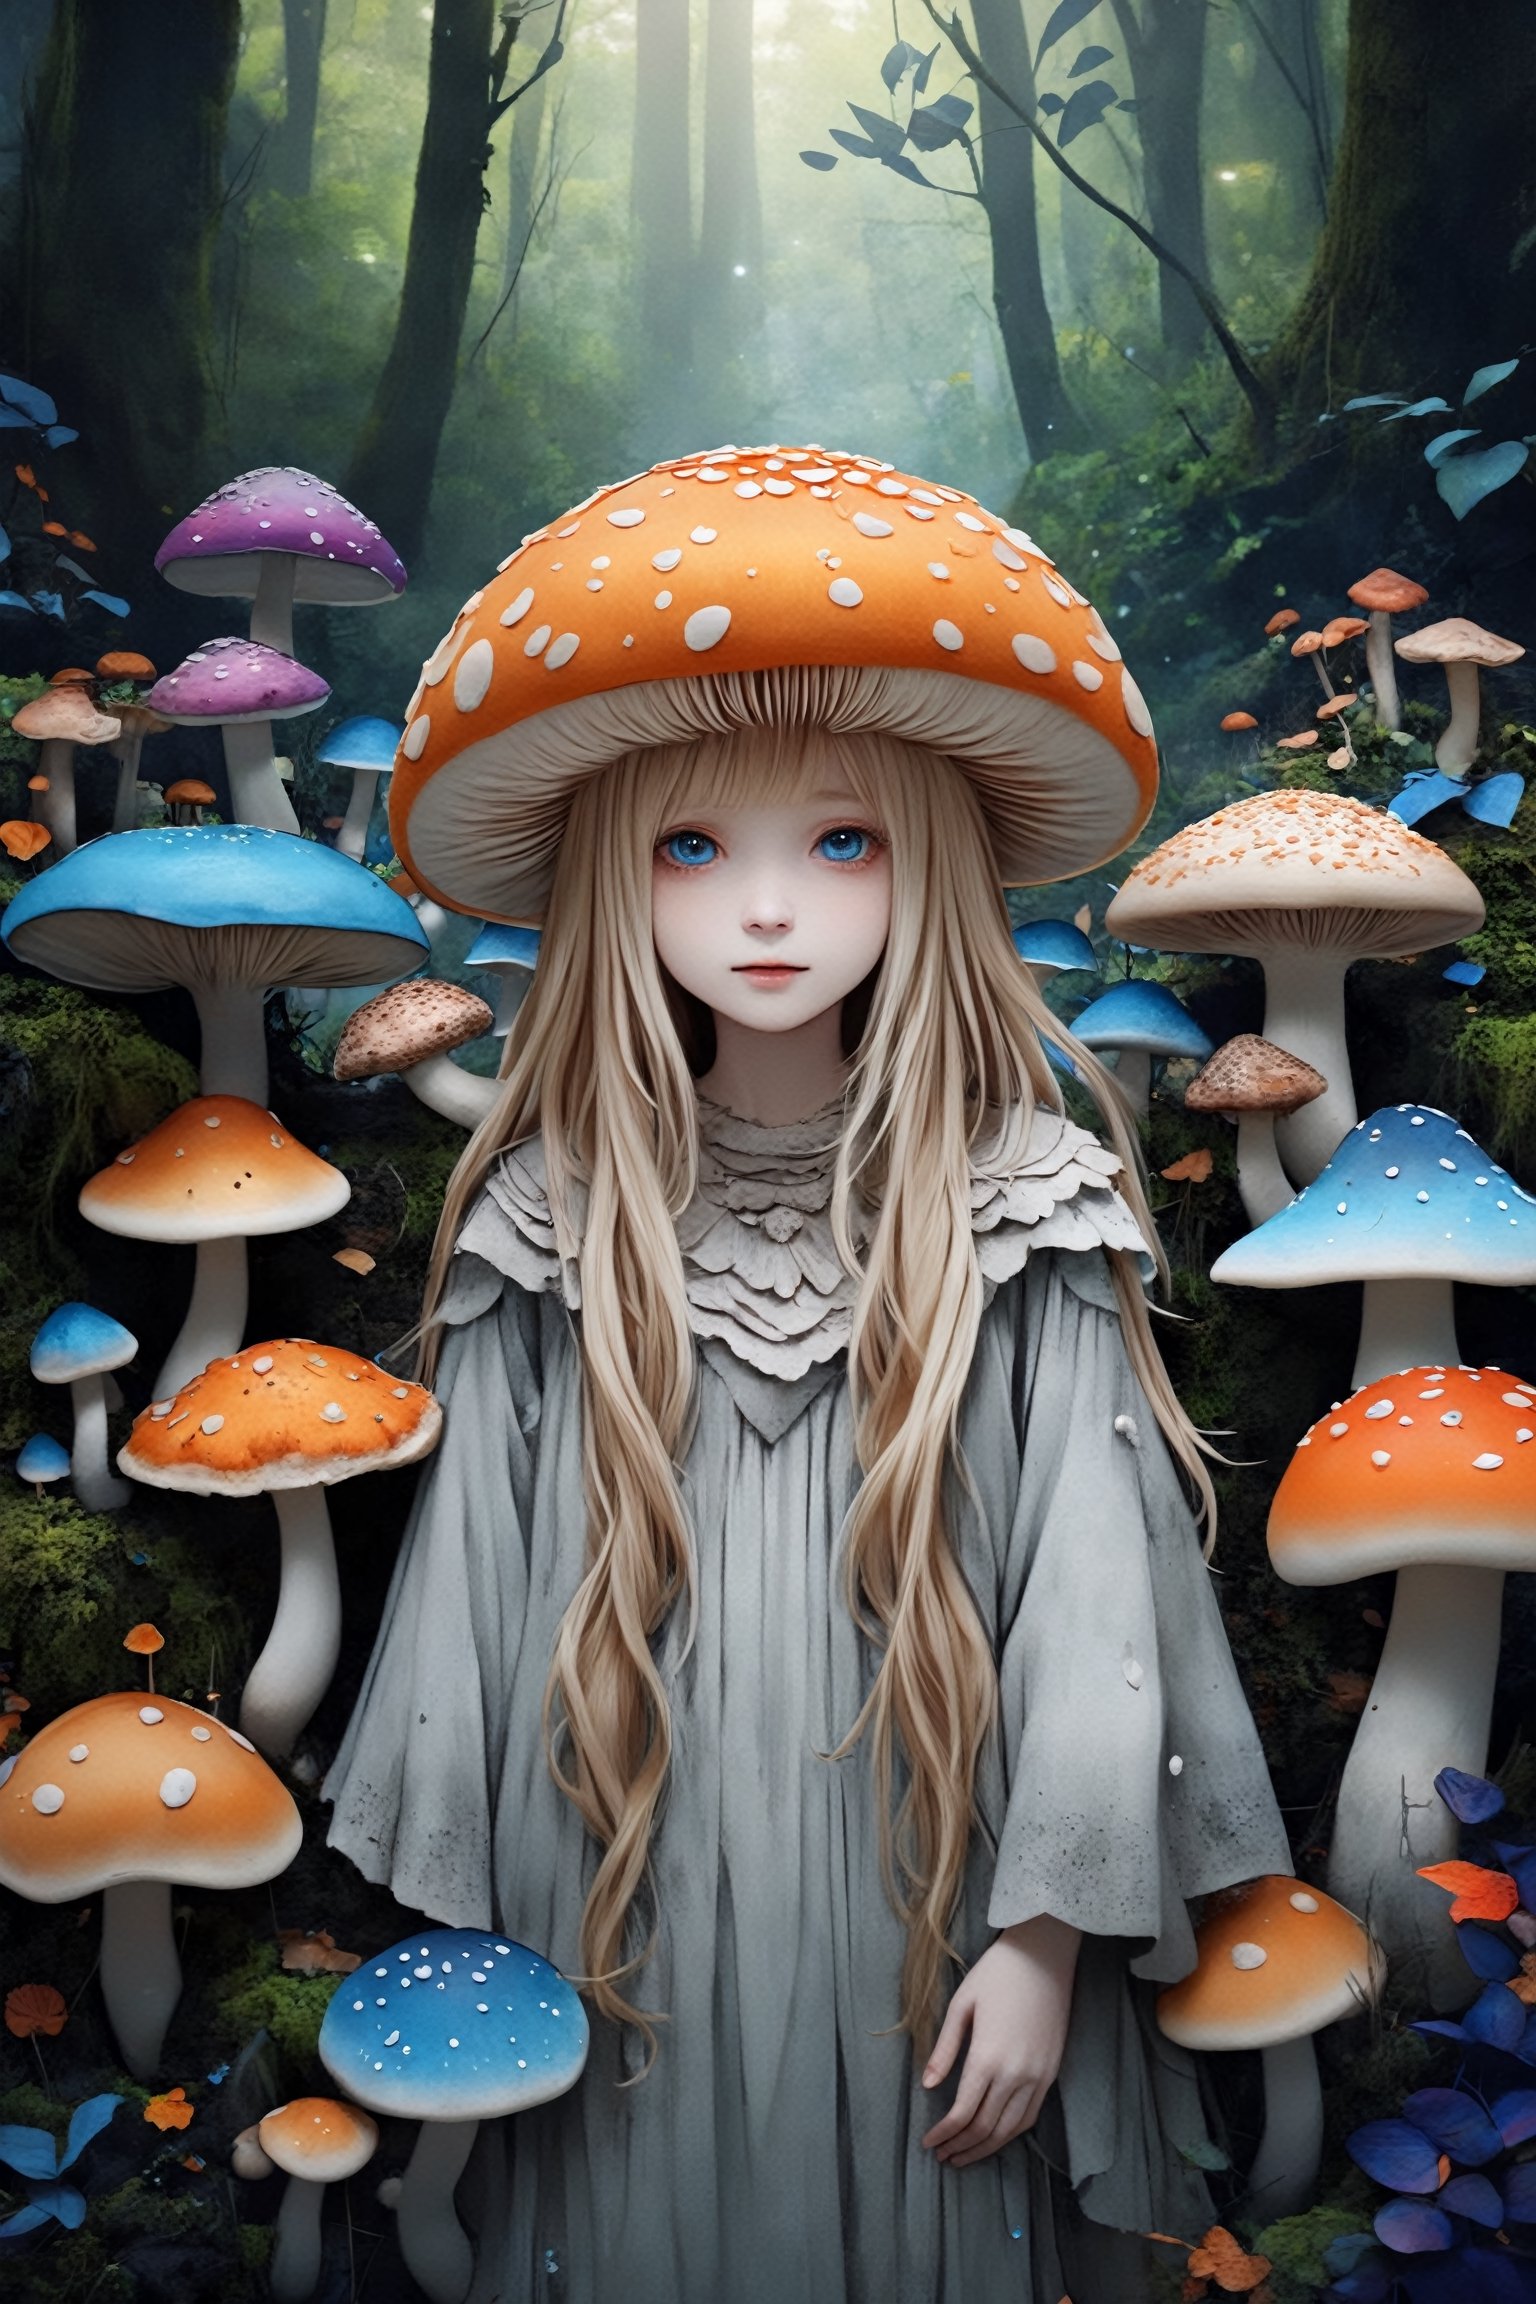 albino mushroom girl, mushroom Head,
stands amidst the tranquility,Adorned with soft, pale-colored petals resembling mushroom caps and delicate mycelium cascading from her hair, she exudes ethereal beauty.,Her eyes silver or pale blue, convey mystery and wonder as she moves gracefully through the enchanted landscape, Surrounded by vibrant colors and playful woodland creatures, she embodies the magic and wonder of nature's hidden treasures.",mushroomz,dal